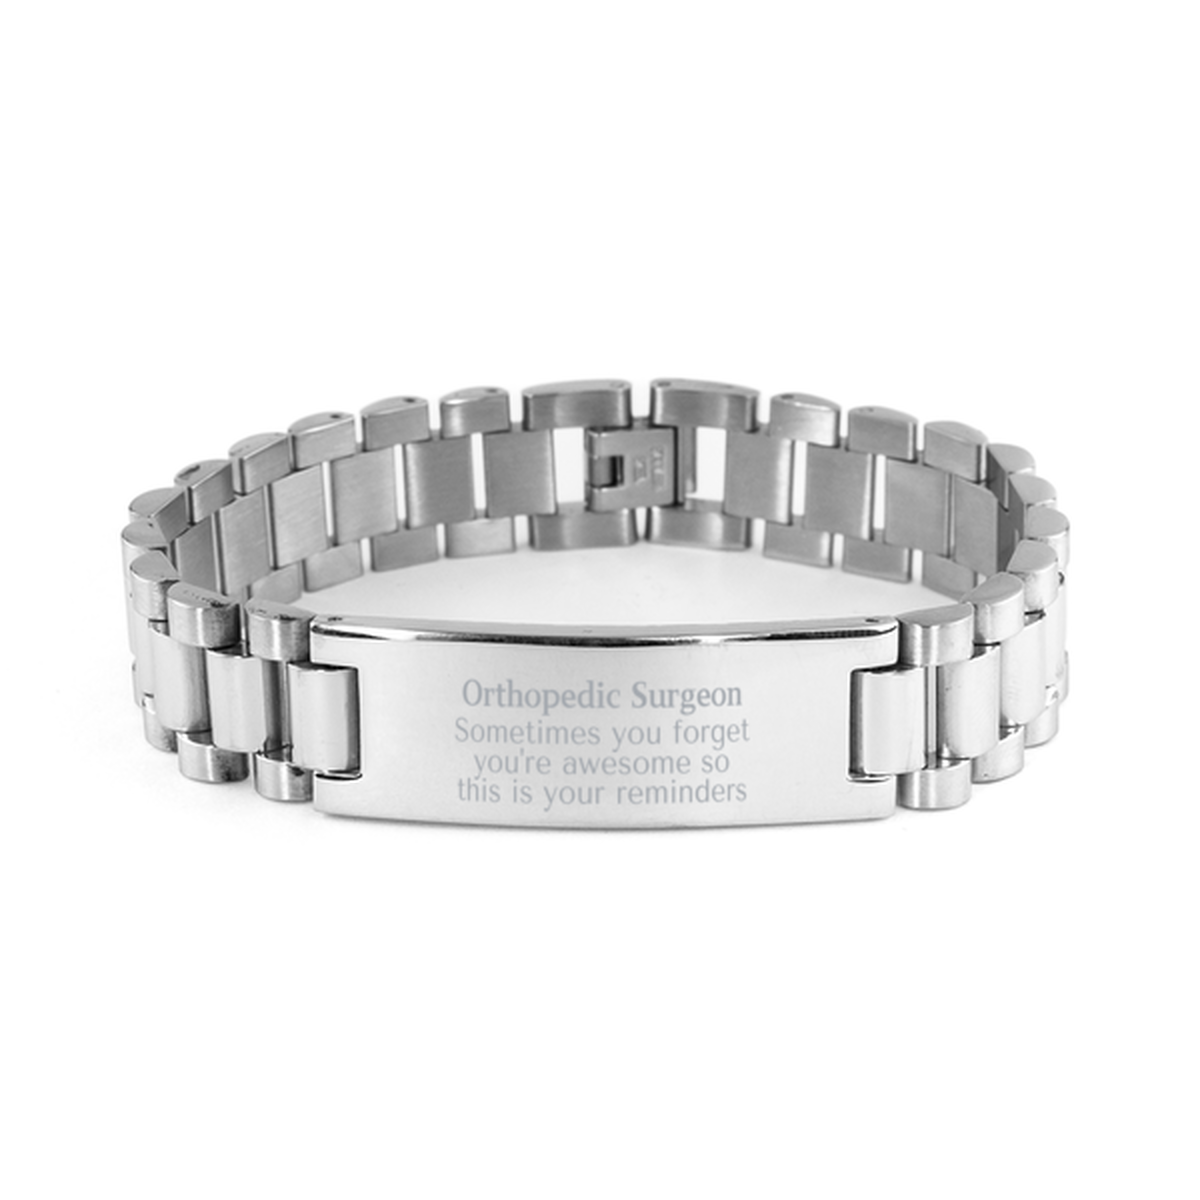 Sentimental Orthopedic Surgeon Ladder Stainless Steel Bracelet, Orthopedic Surgeon Sometimes you forget you're awesome so this is your reminders, Graduation Christmas Birthday Gifts for Orthopedic Surgeon, Men, Women, Coworkers